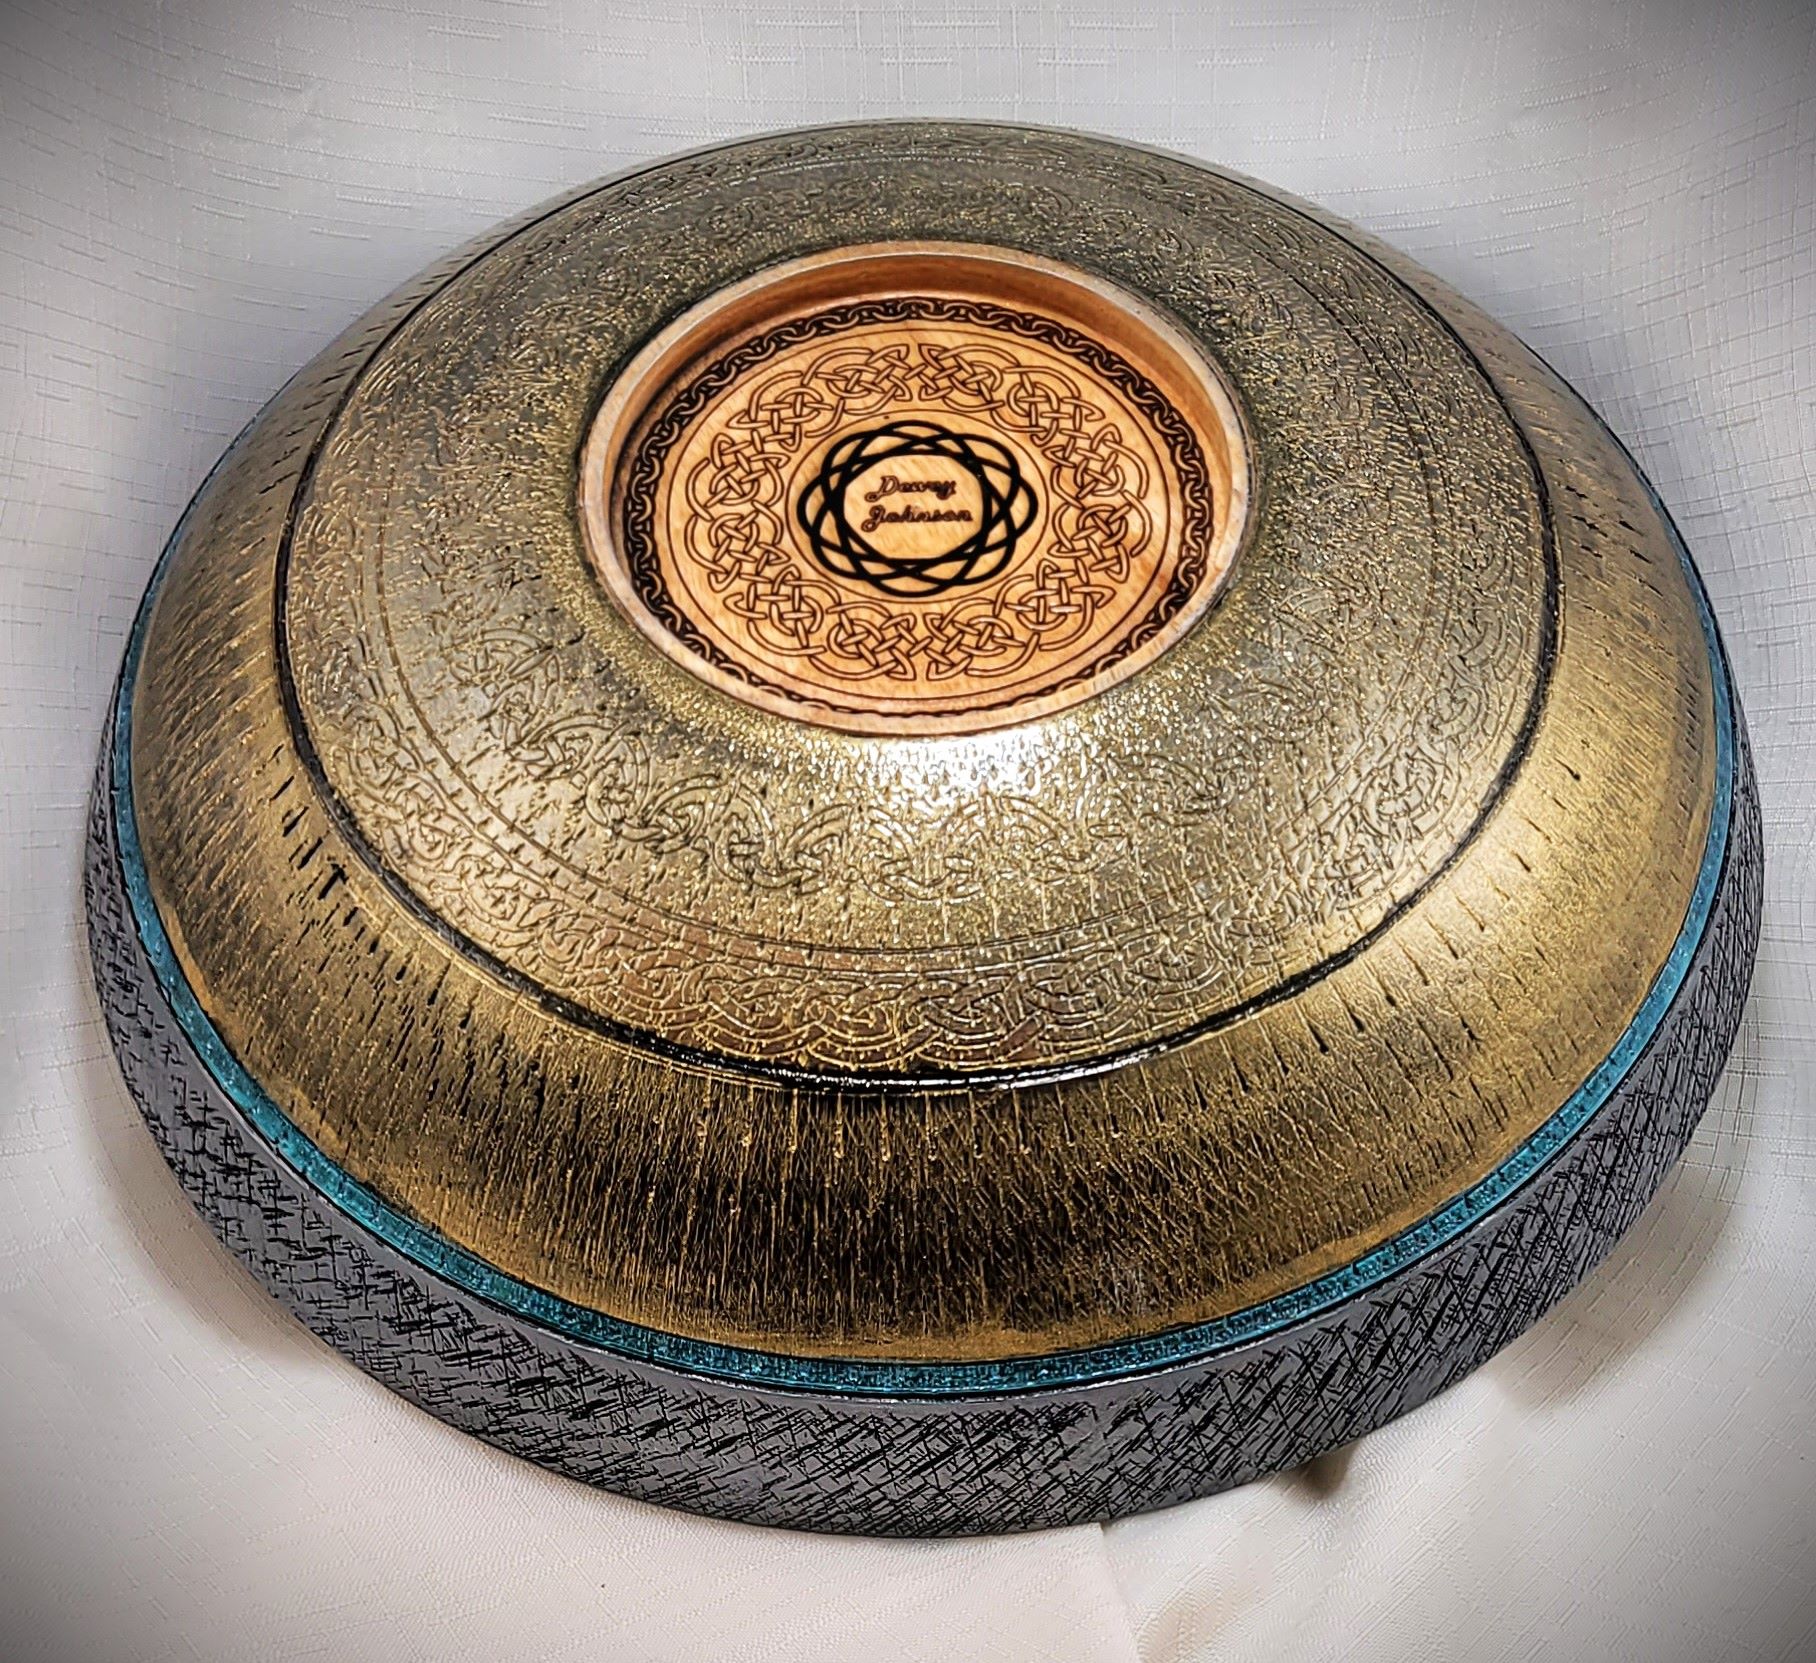 Textured and Engraved Bowl Bottom